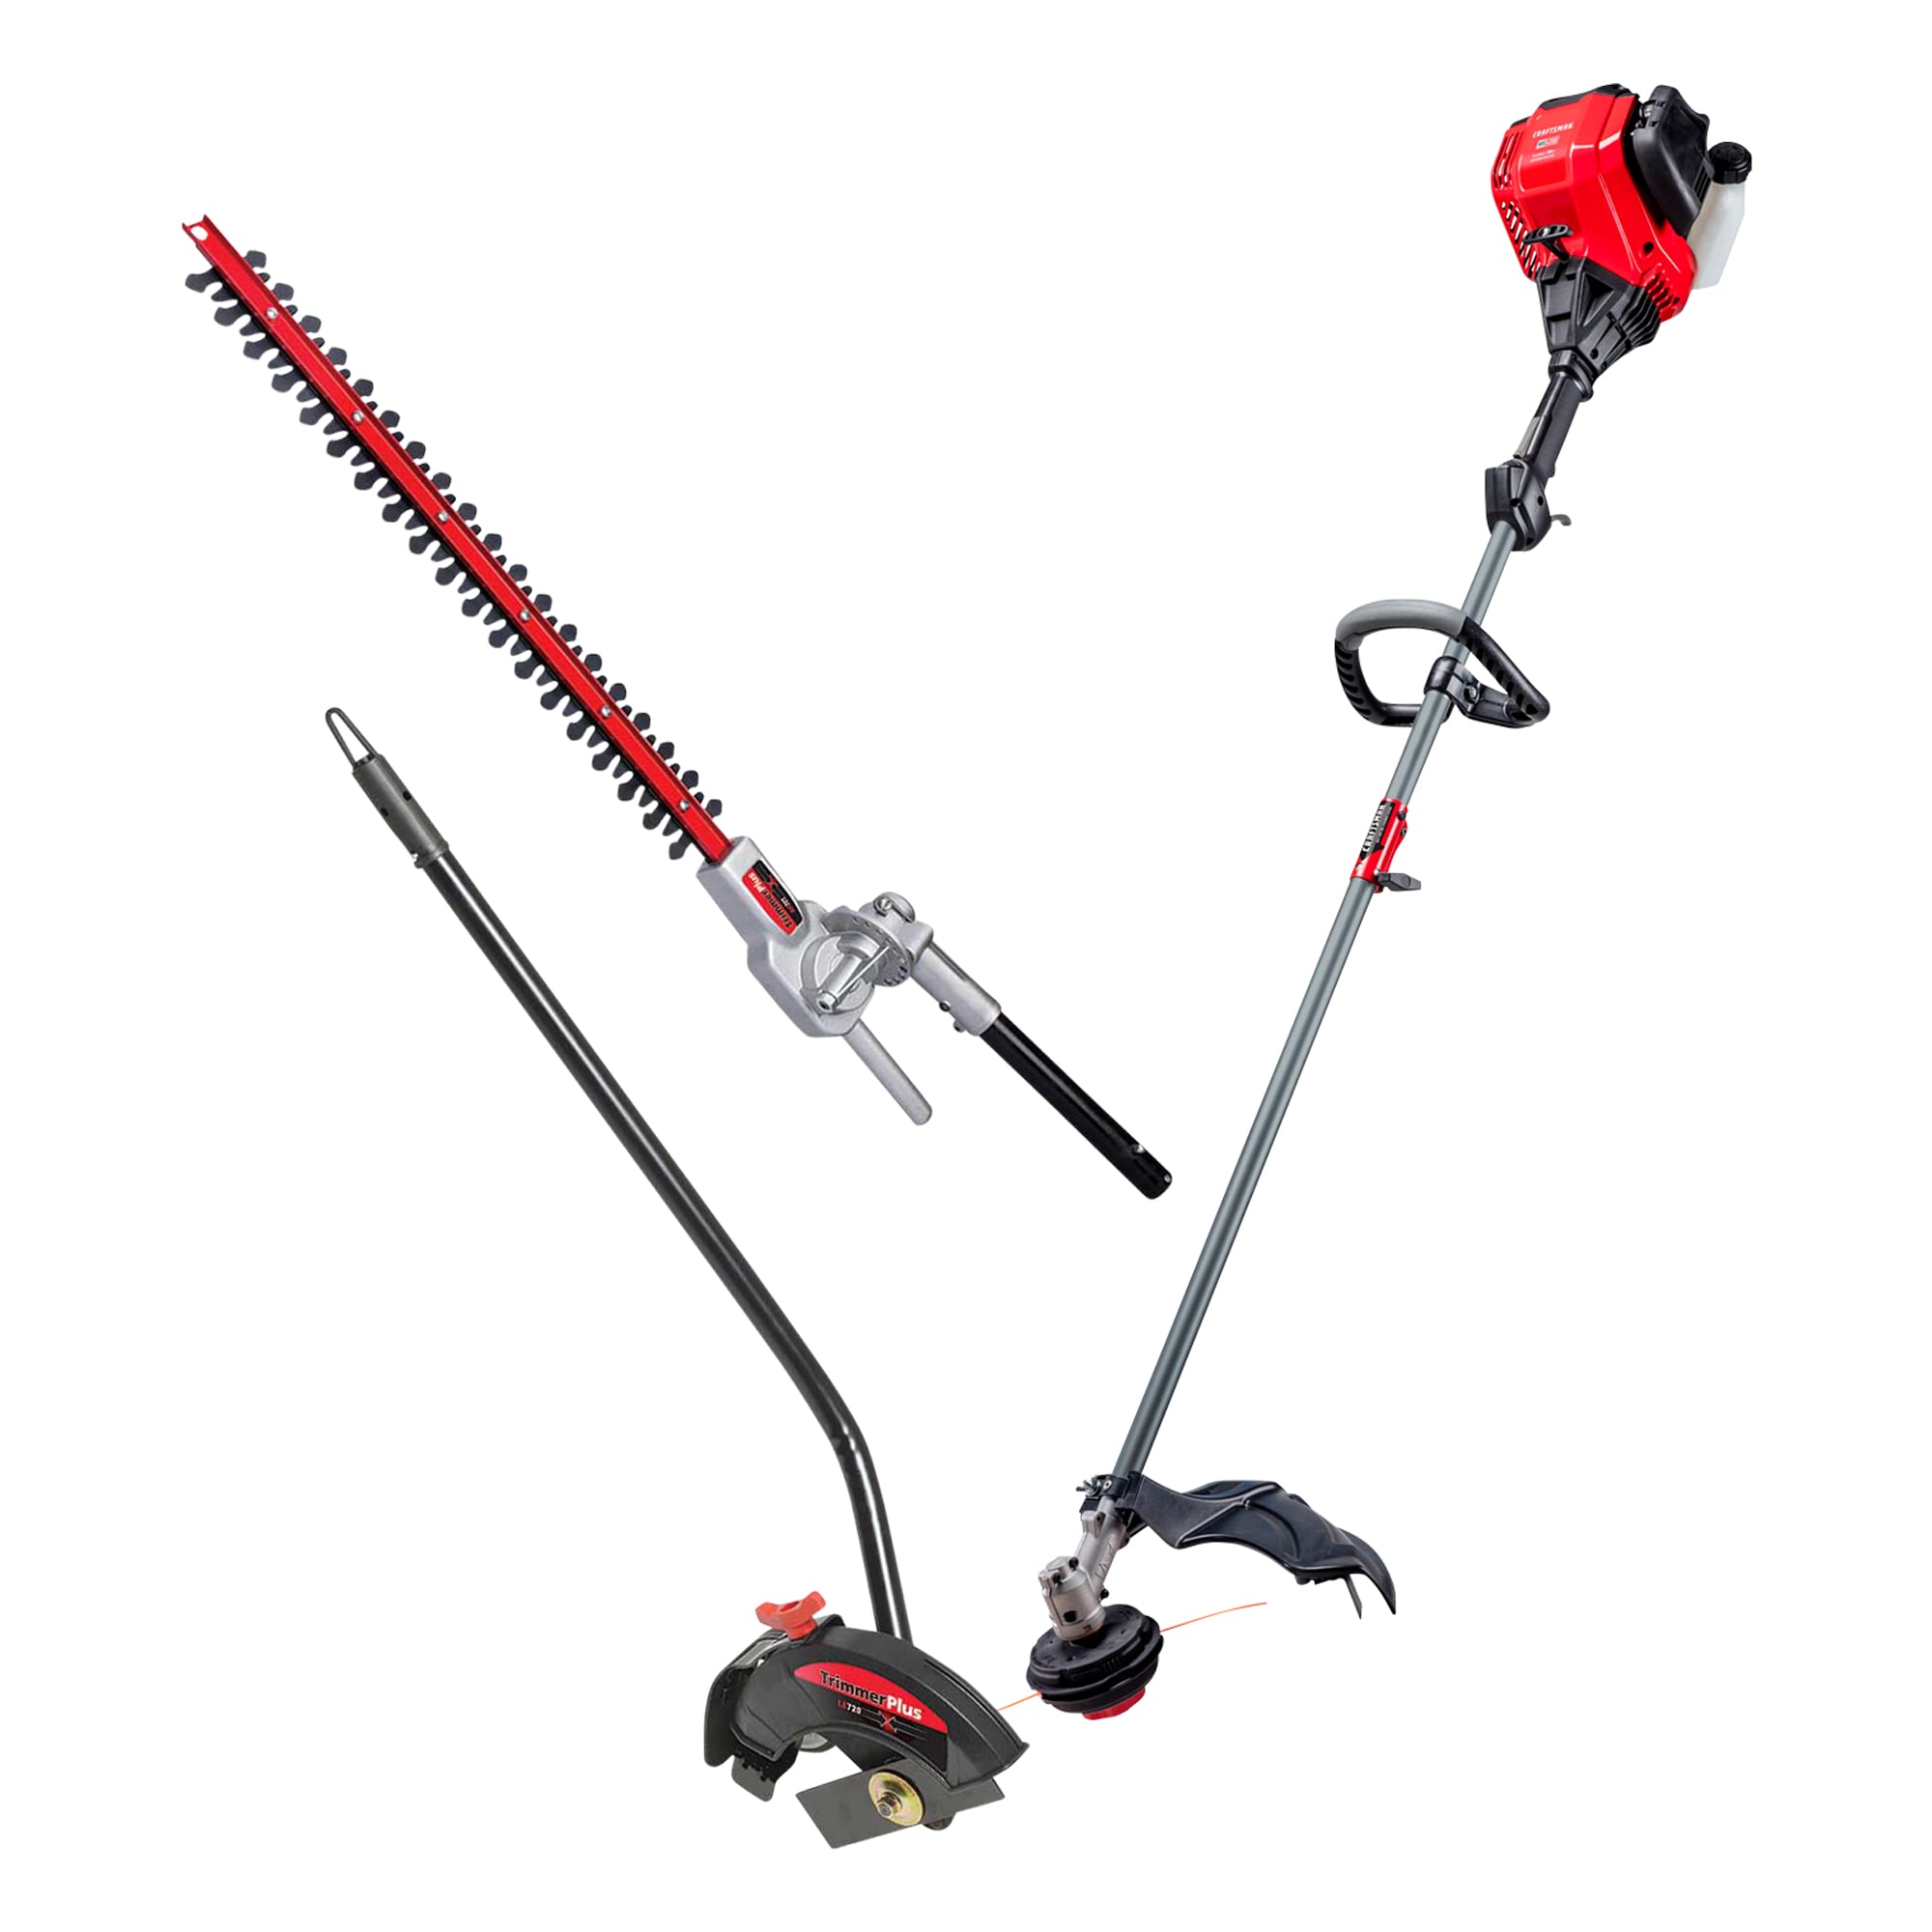 Shop CRAFTSMAN 4Cycle String Trimmer Combo at